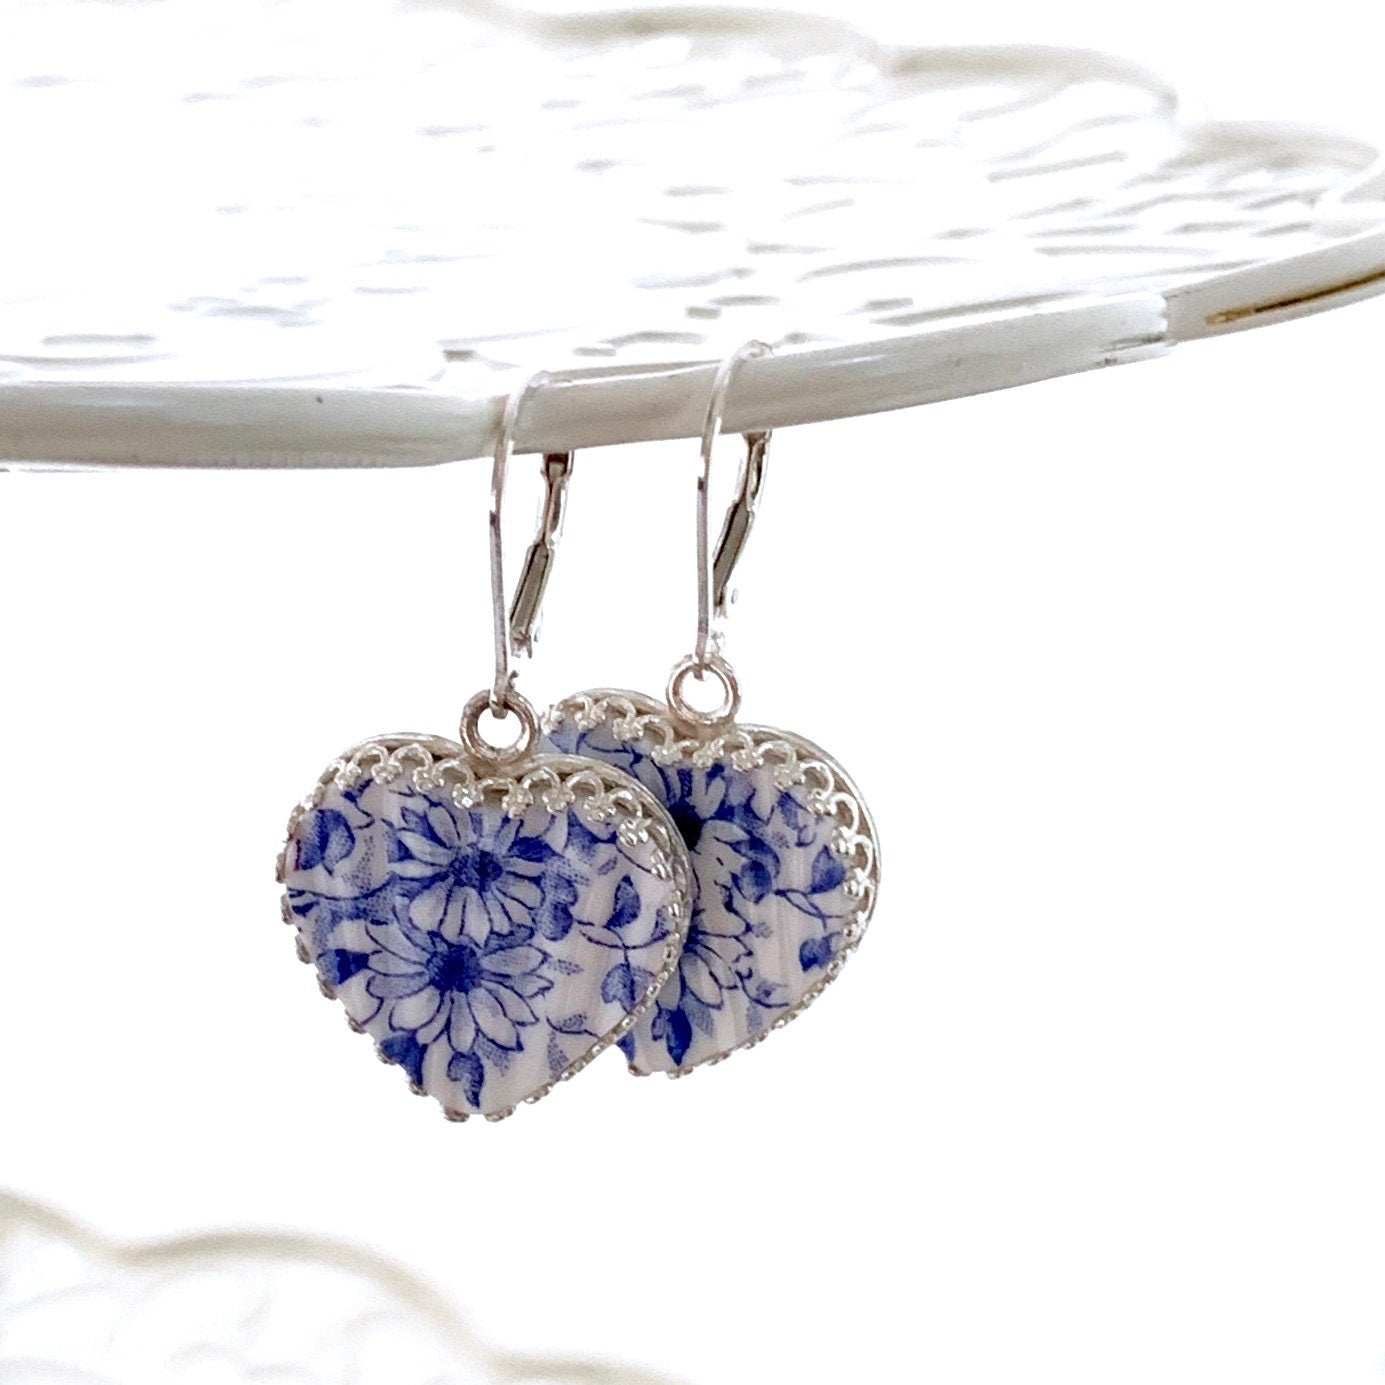 20th Anniversary Gift for Wife Blue and White Broken China Jewelry Heart Earrings Gift